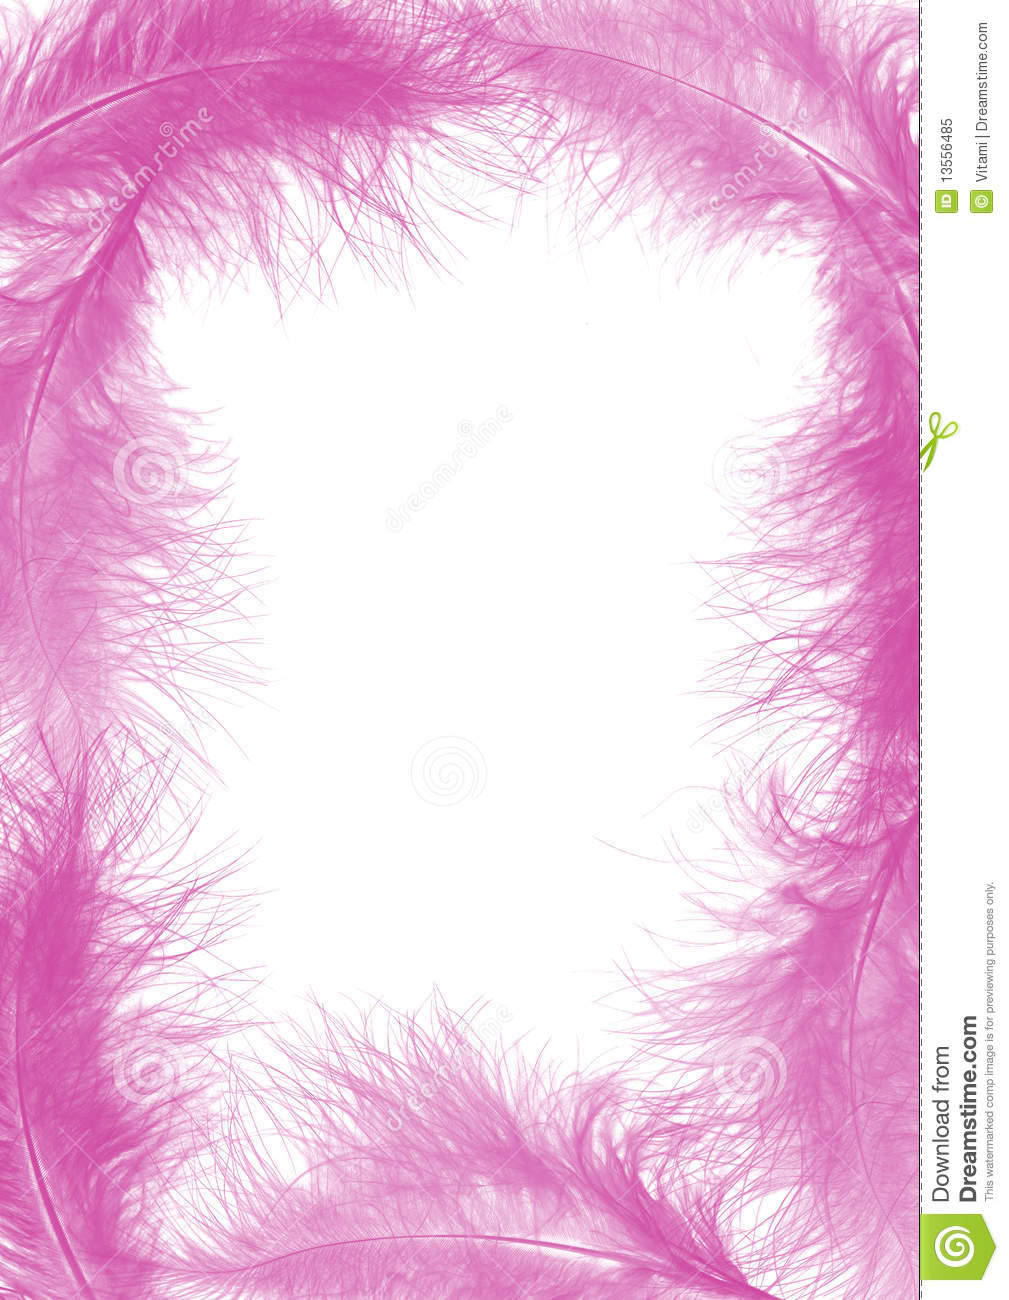 Easter Decorative Frame Created By Pink Feathers   Background For Your